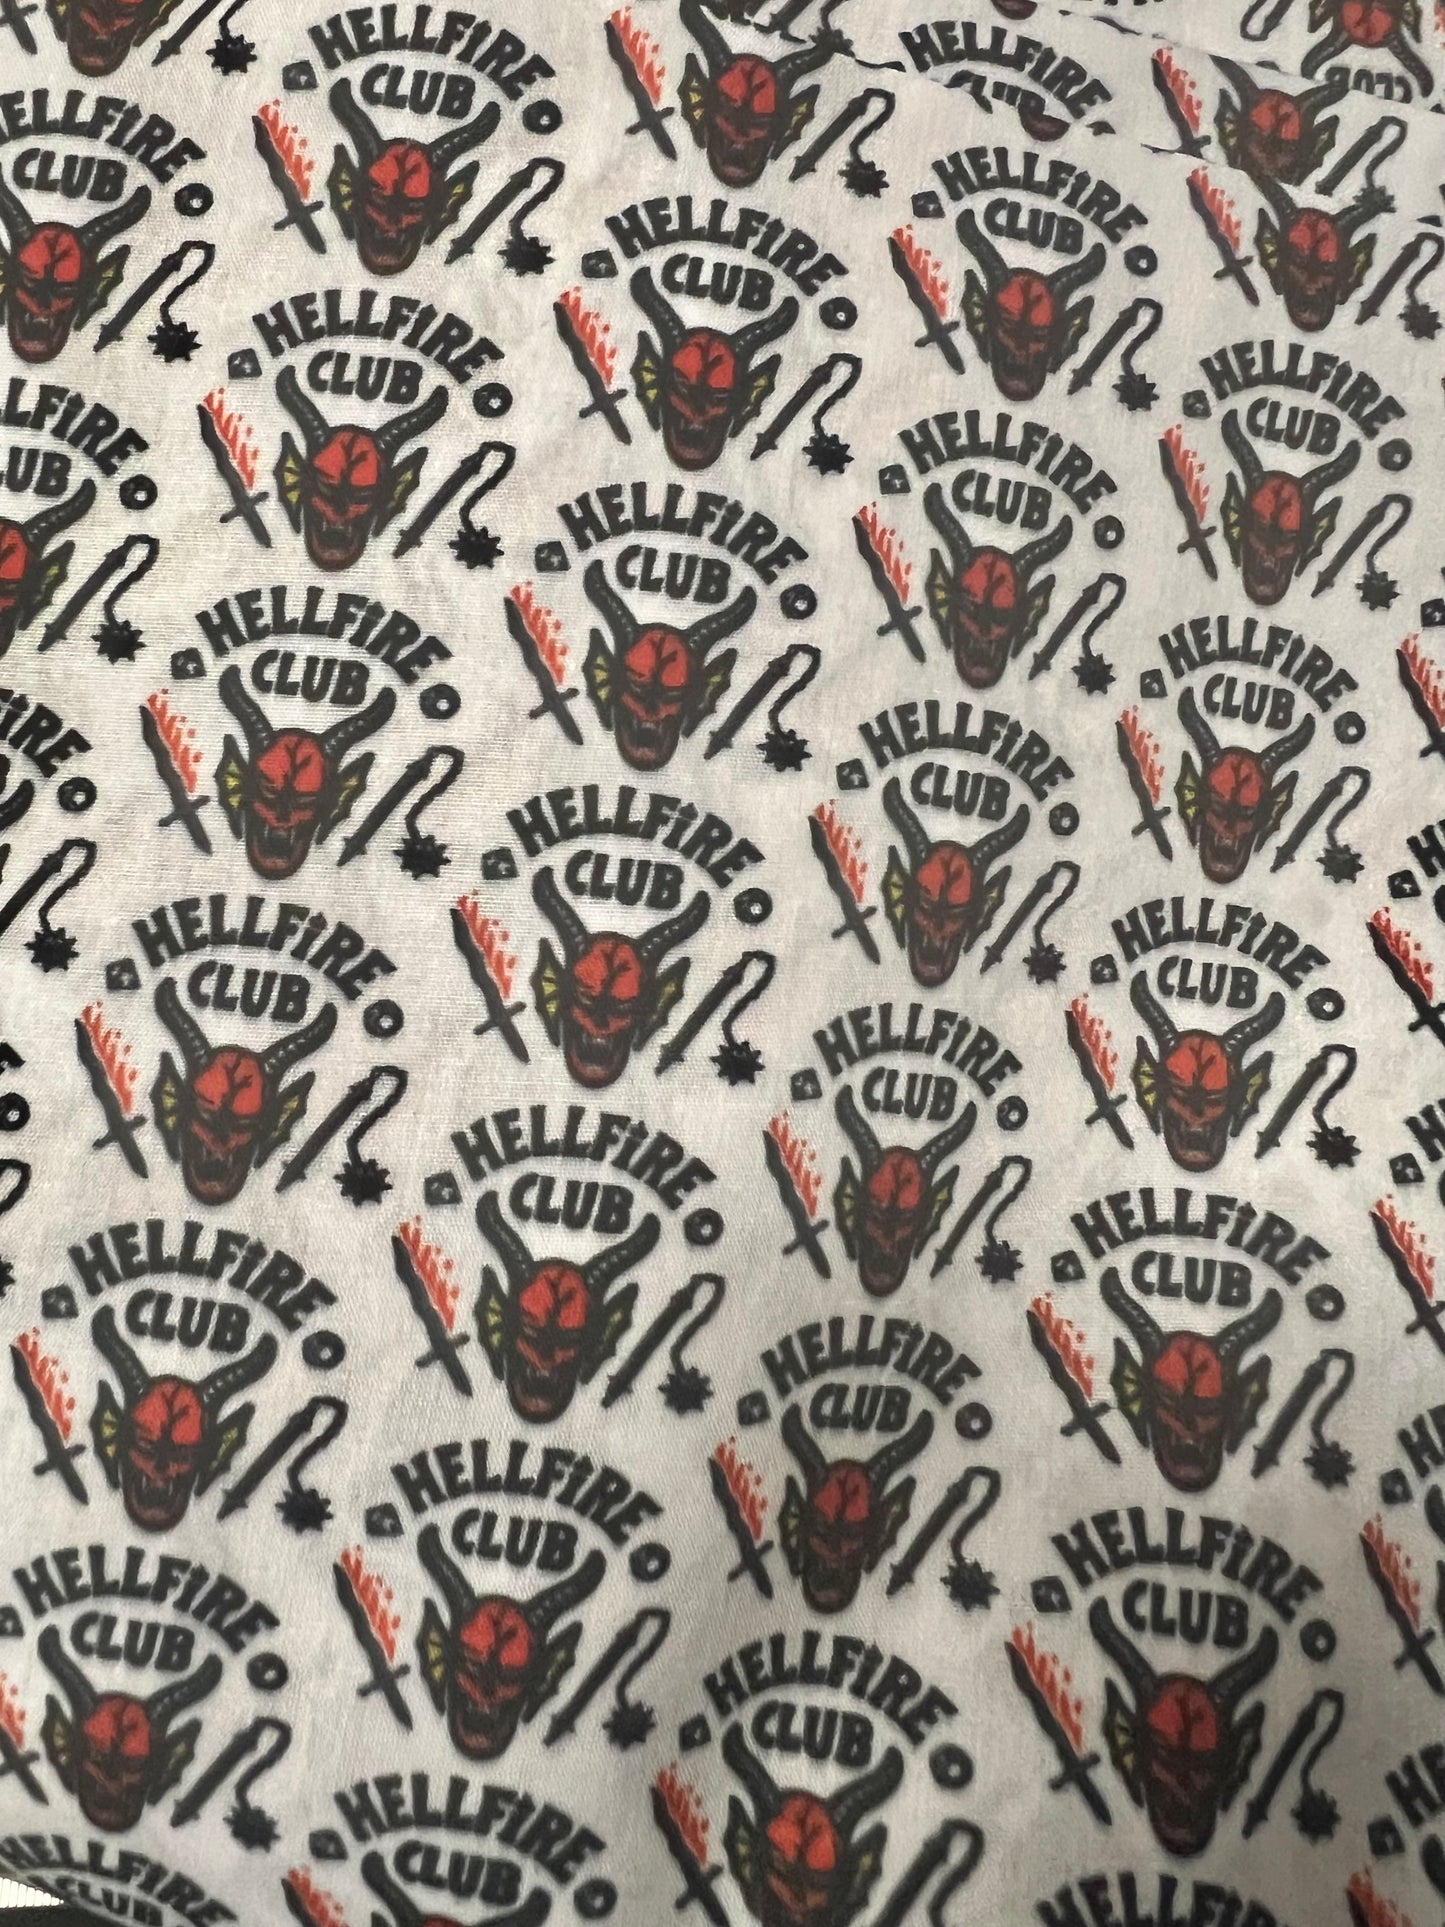 HELLFIRE CLUB STRANGER THINGS - Polycotton Fabric from Japan